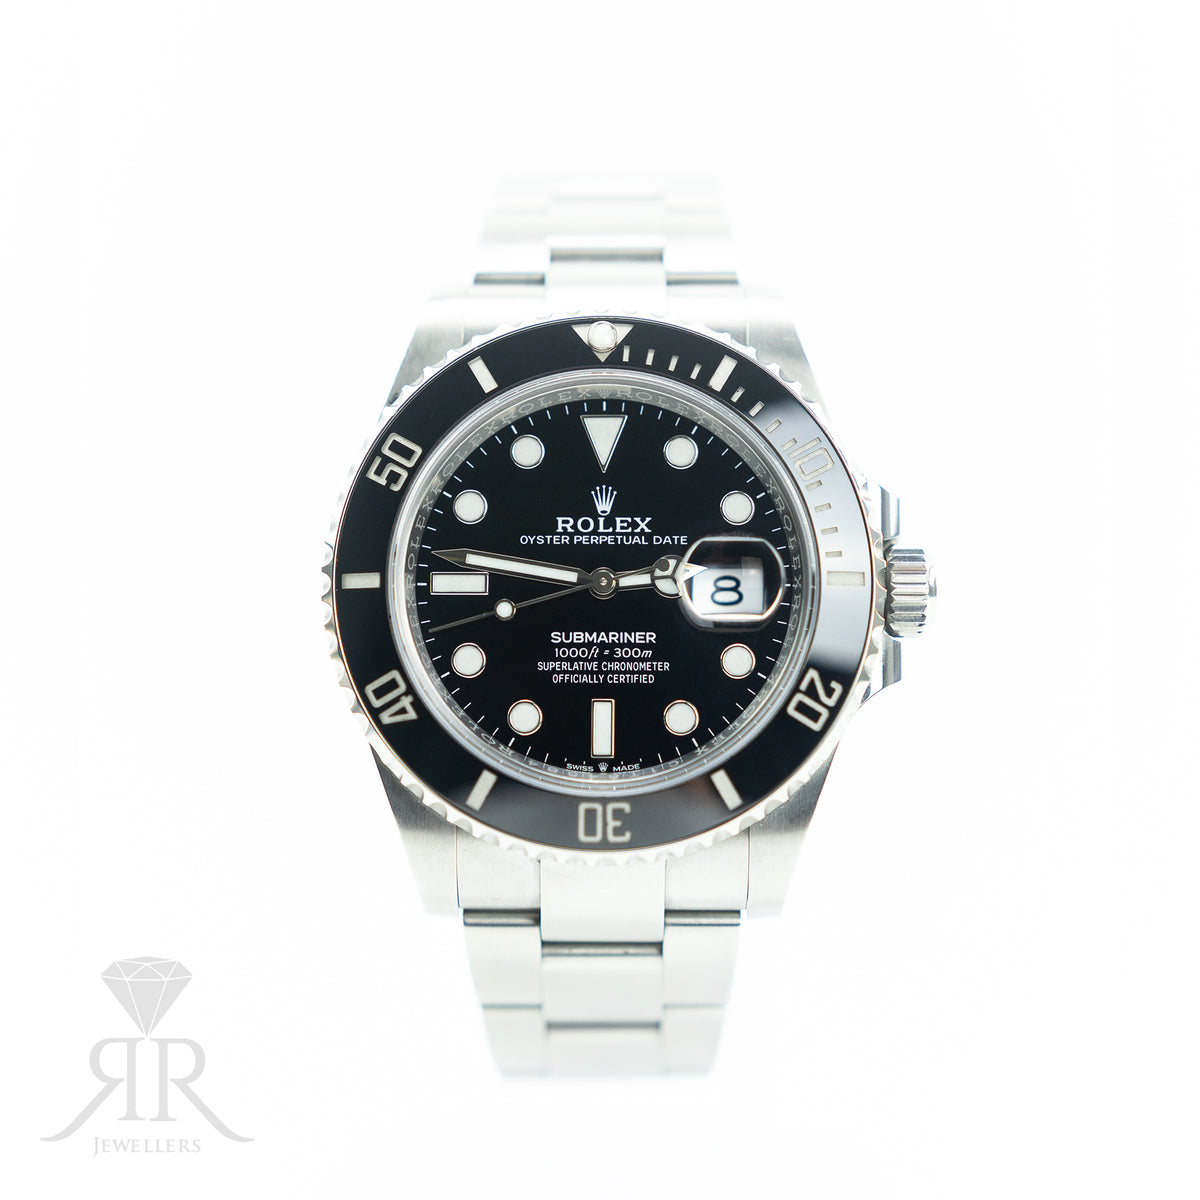 2022 Rolex SUBMARINER DATE Oyster, 41 mm, Oystersteel, 126610LN available at RR Jewellers Yarm